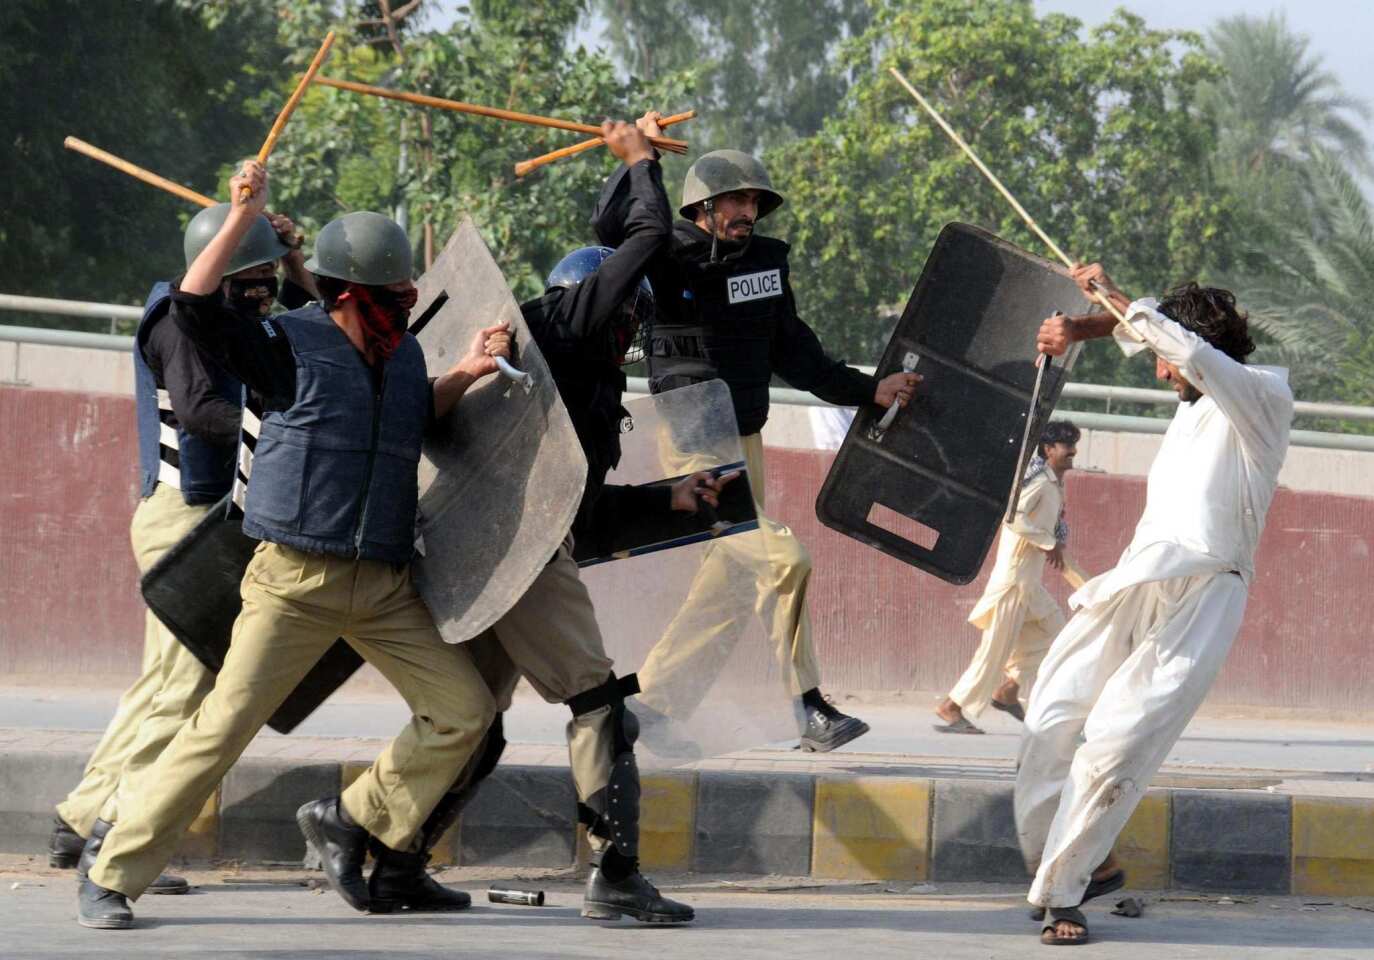 Riot police in Peshawar descend upon protesters with batons during a demonstration protesting the anti-Islam movie "Innocence of Muslims." Violence erupted across Pakistan on Friday amid anger over the film.